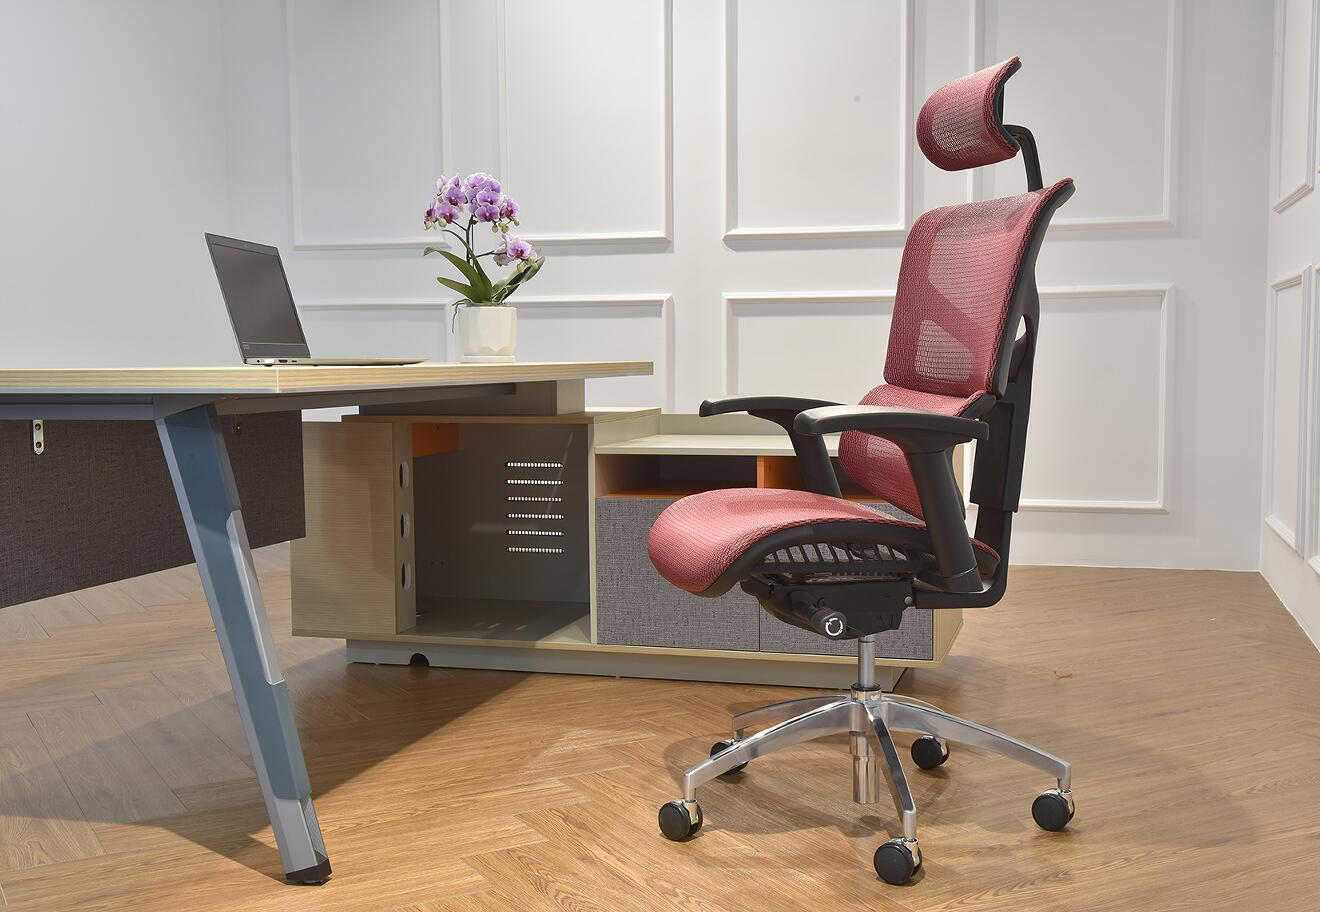 news-Hookays Best Office Chairs with Neck Support –SAIL – A Comfortable Choice-Hookay Chair-img